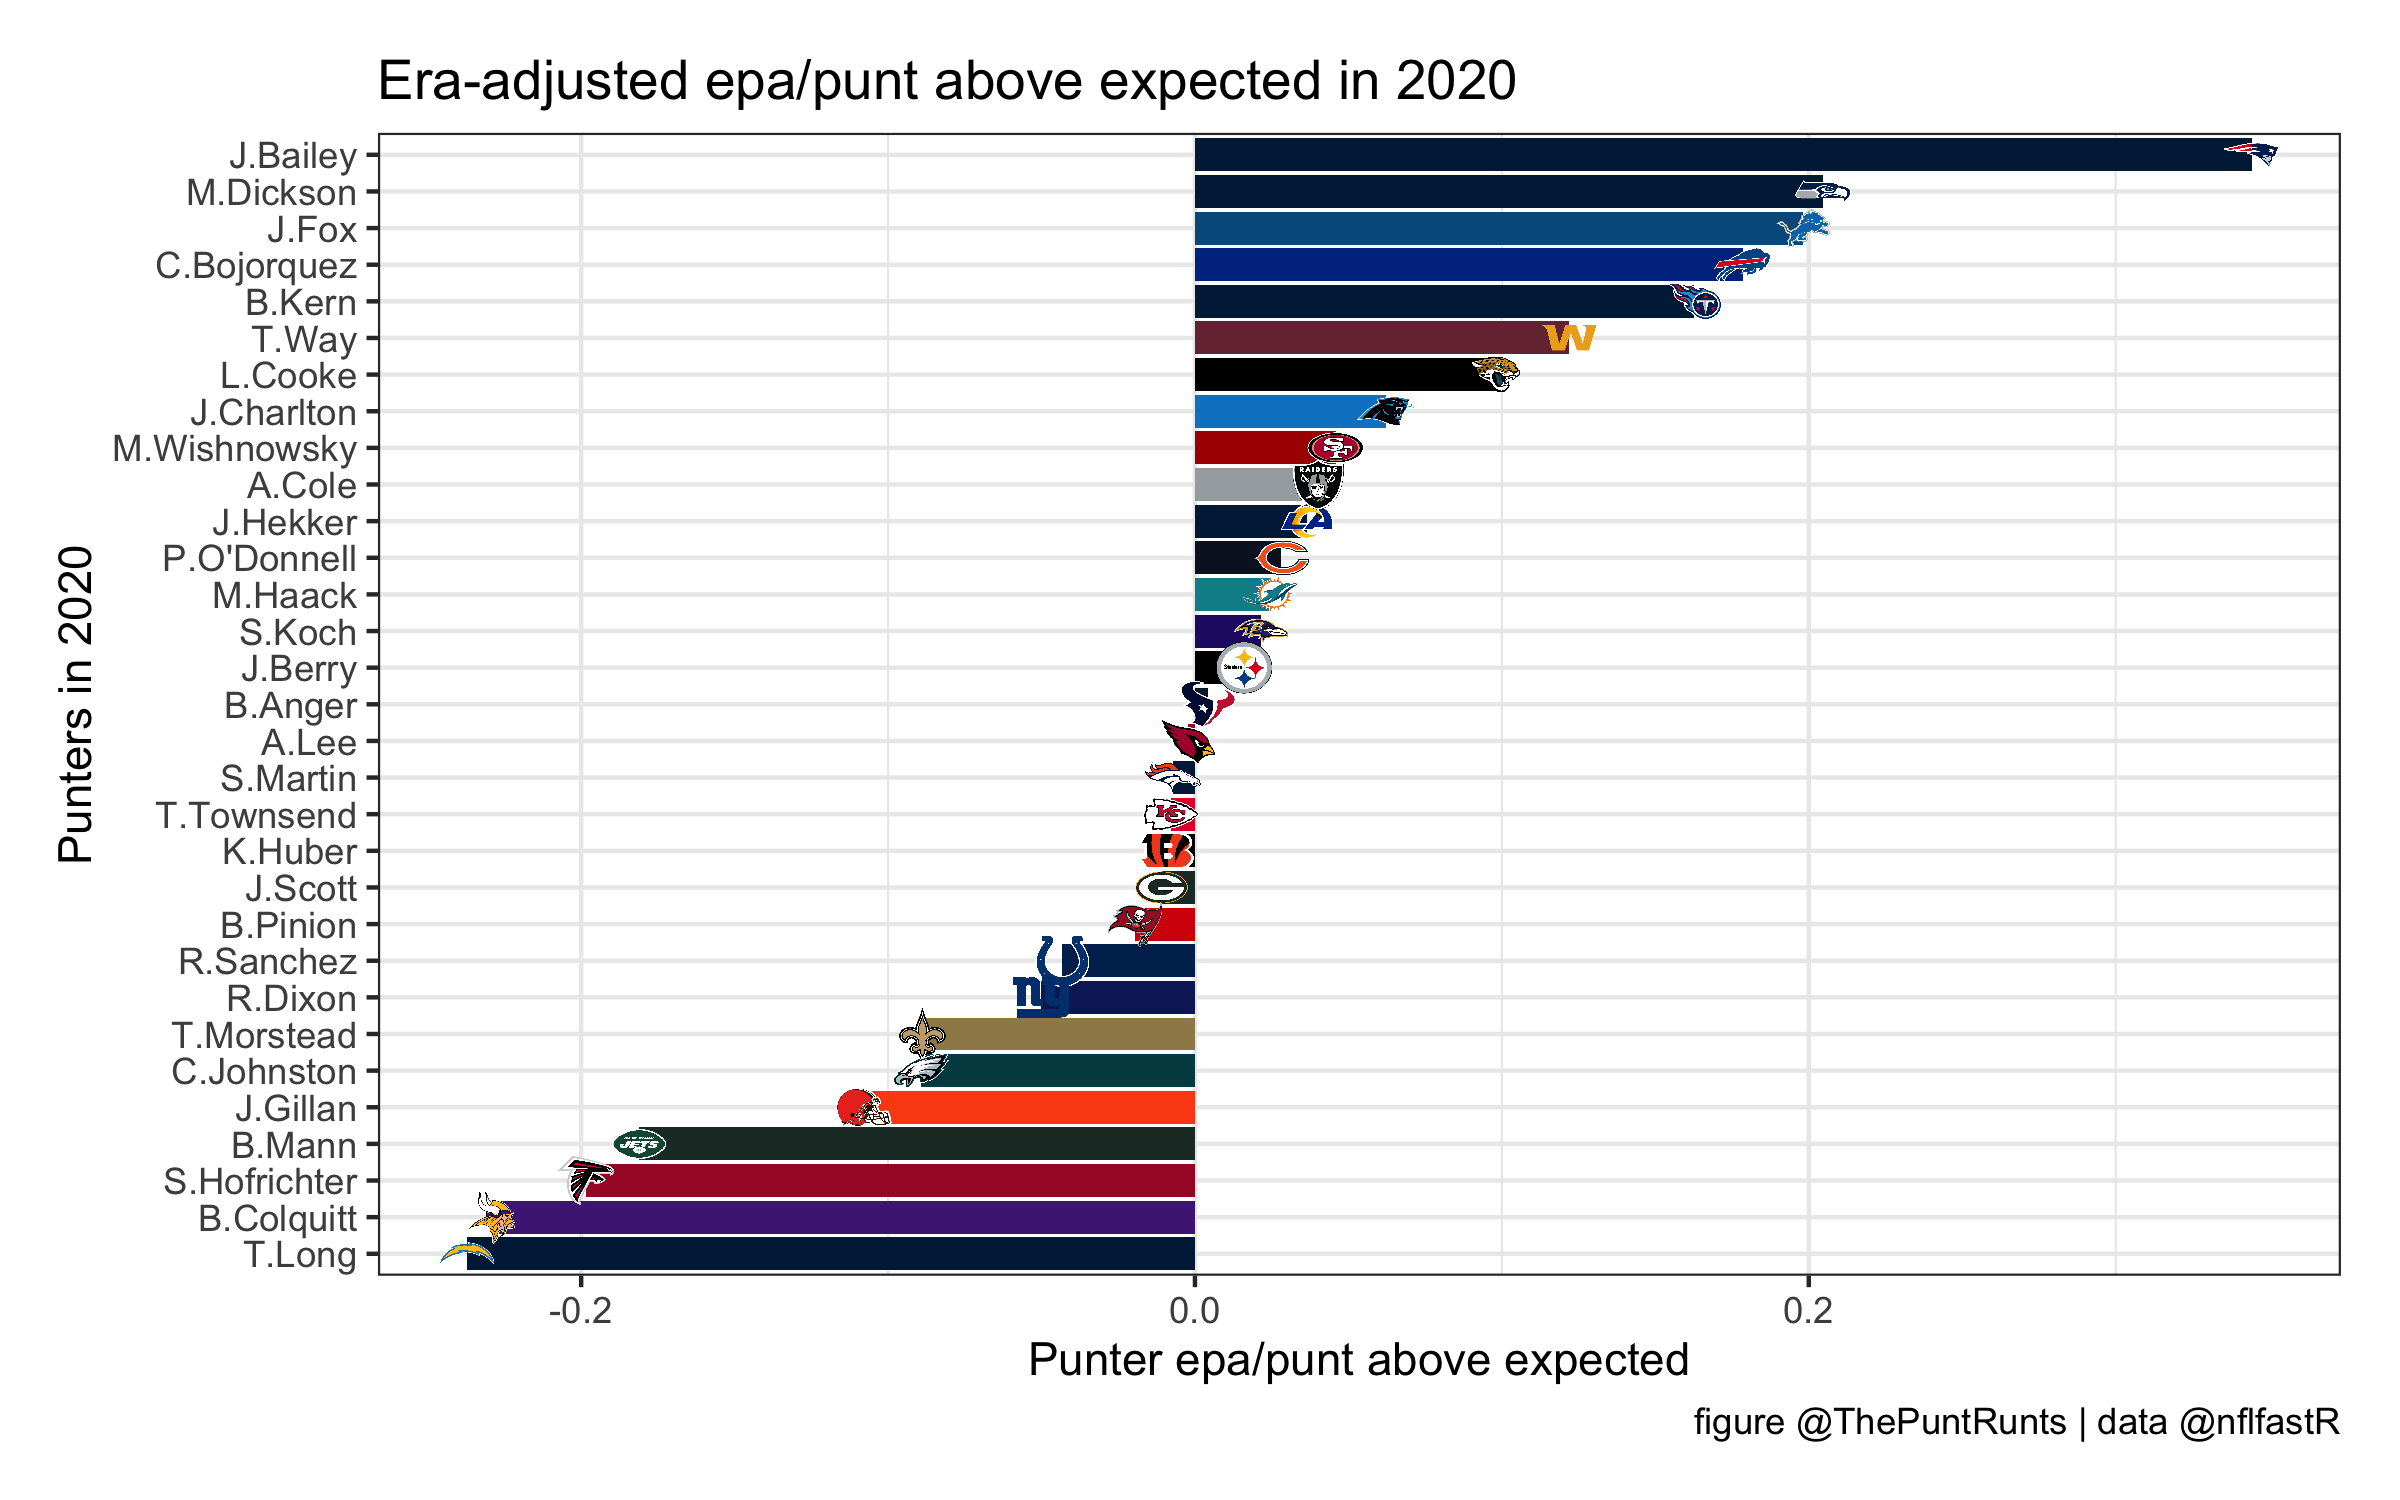 EPA/punt above expected for all punters in 2020